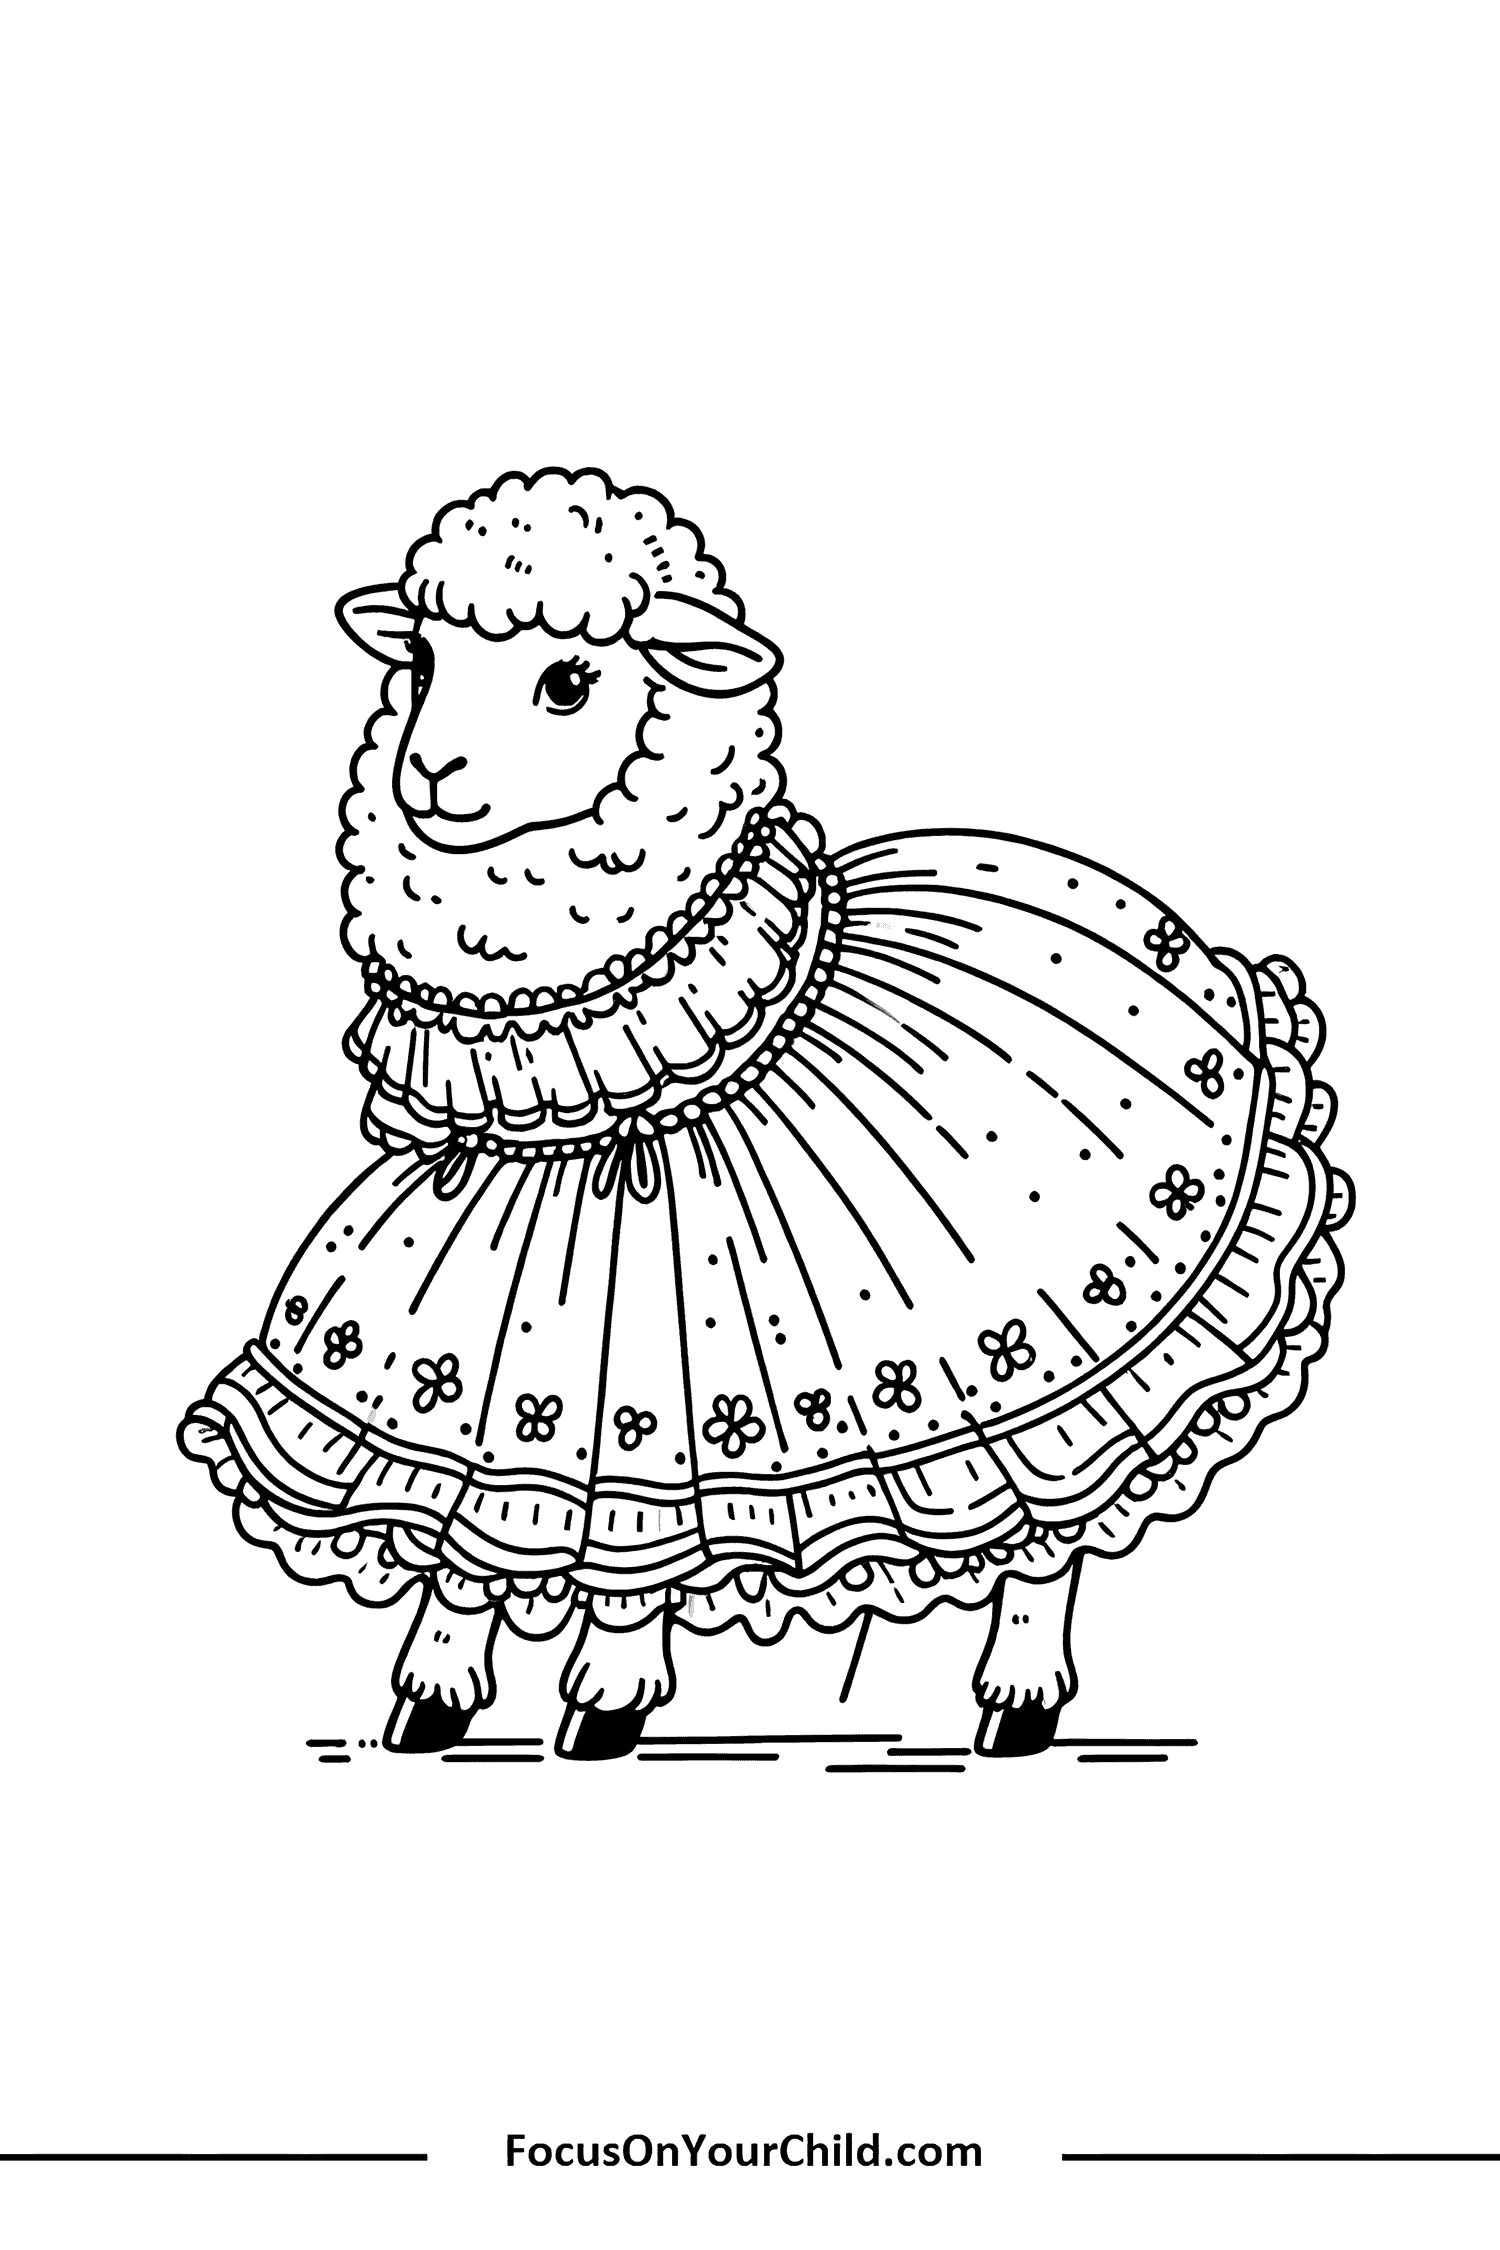 Fluffy sheep in elaborate dress, black and white illustration.